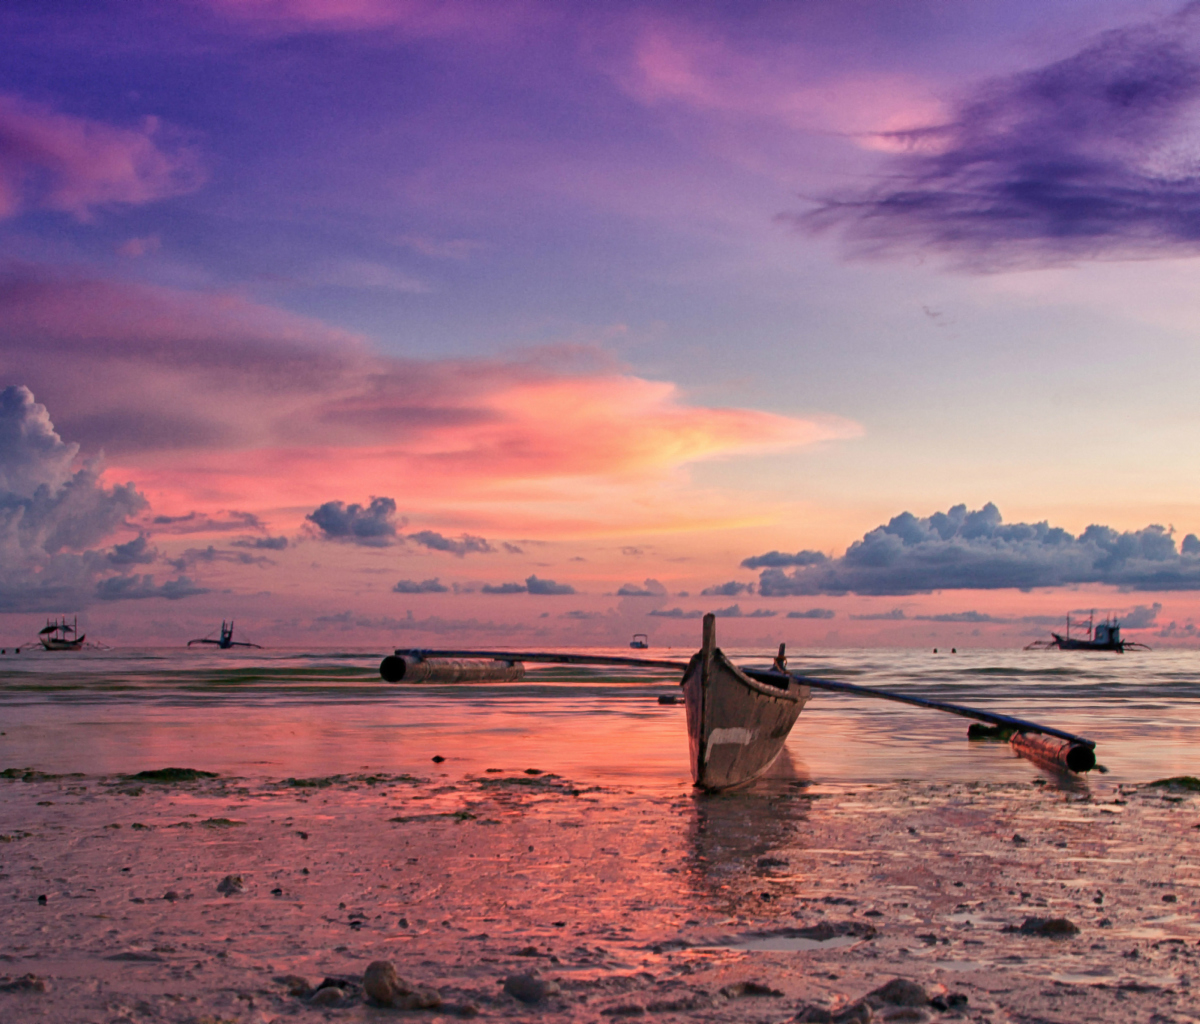 Pink Sunset And Boat At Beach In Philippines wallpaper 1200x1024